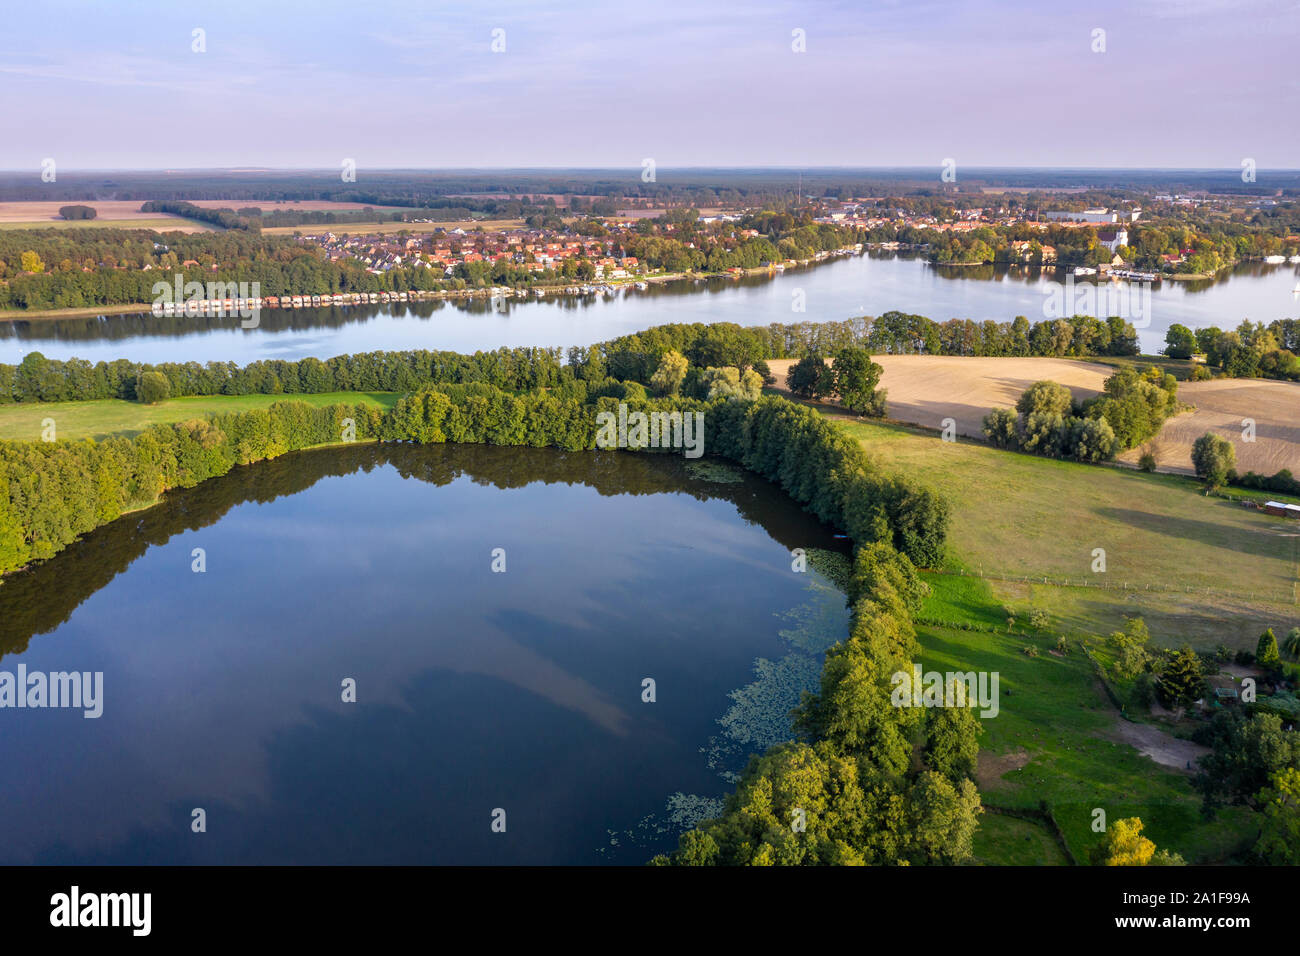 Drone shot, aerial view over  lake Schulzensee to lake Mirow, castle Mirow on island back right, Mecklenburg lake district, Mecklenburg-Vorpommern, Ge Stock Photo